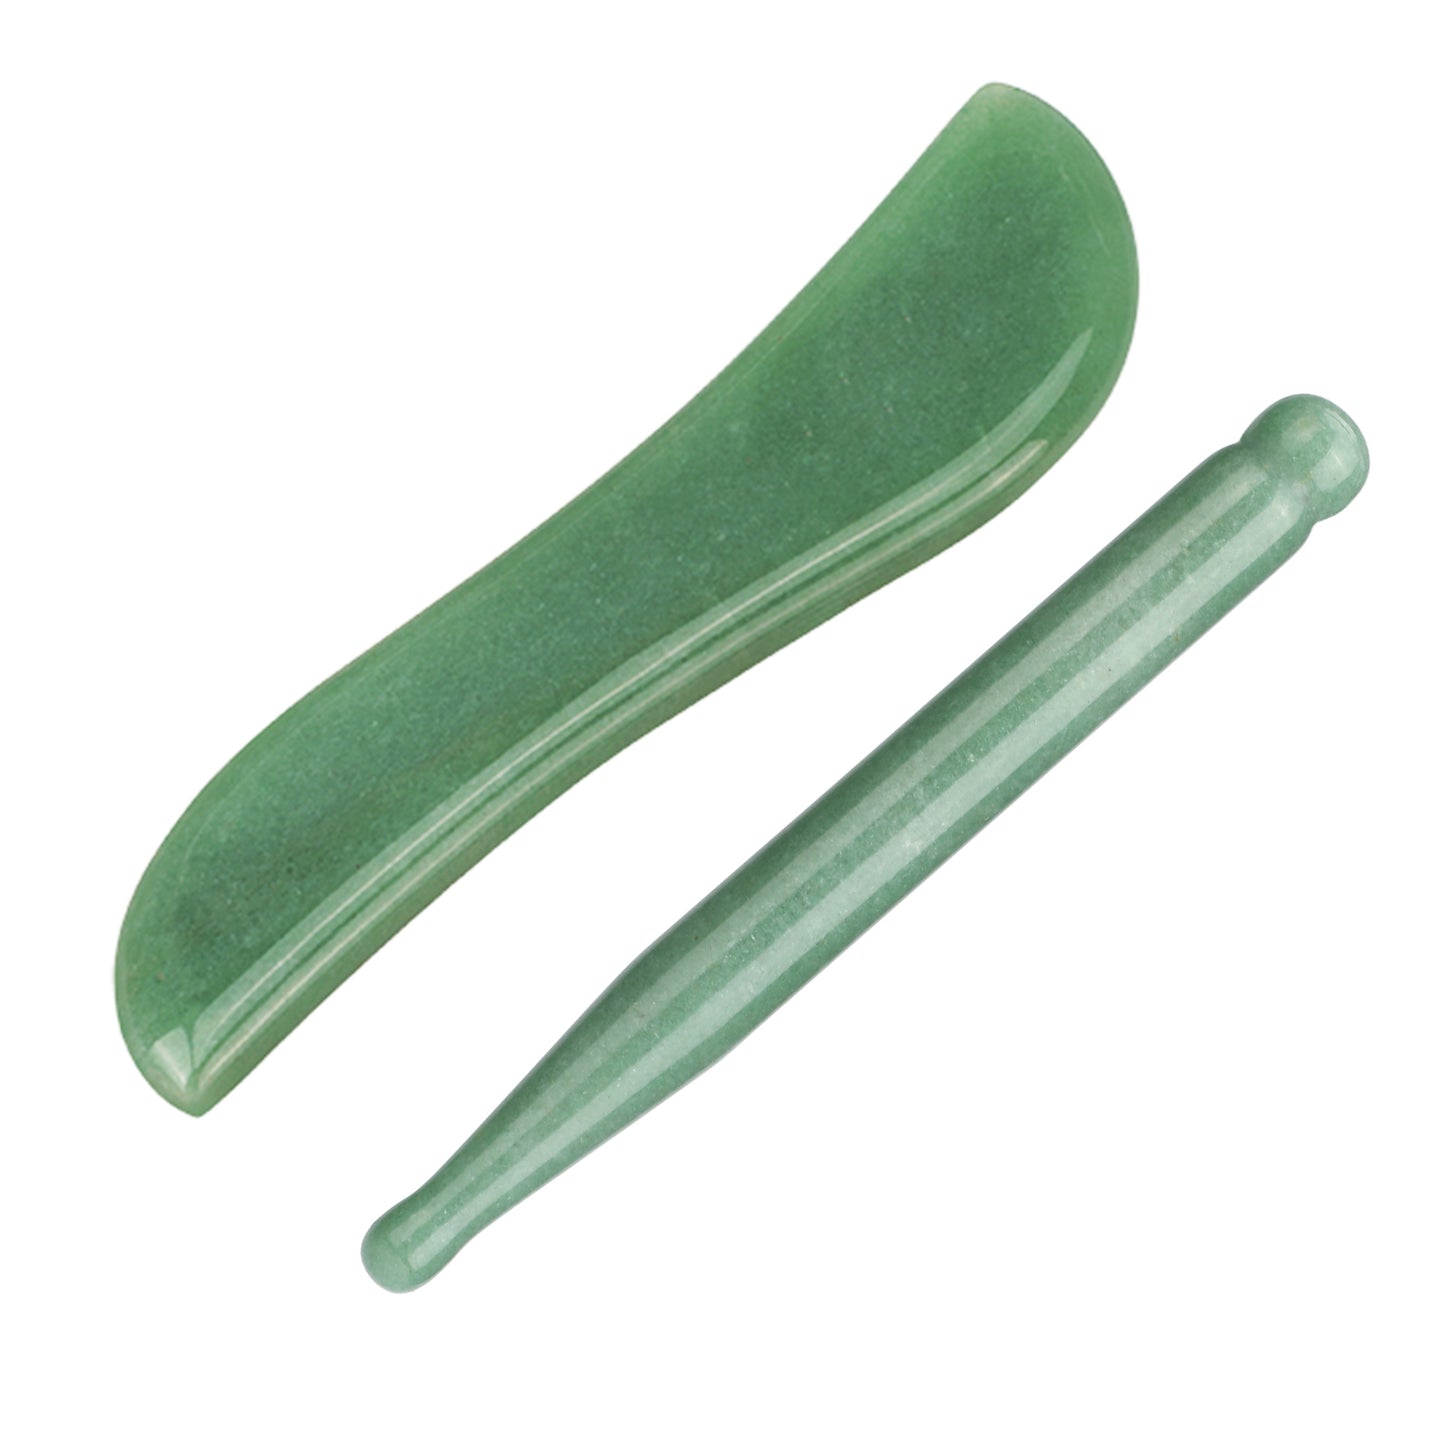 ideayard Jade Gua Sha Stone Scraping Massage Tool Acupuncture Pen Therapy Stick Point Treatment